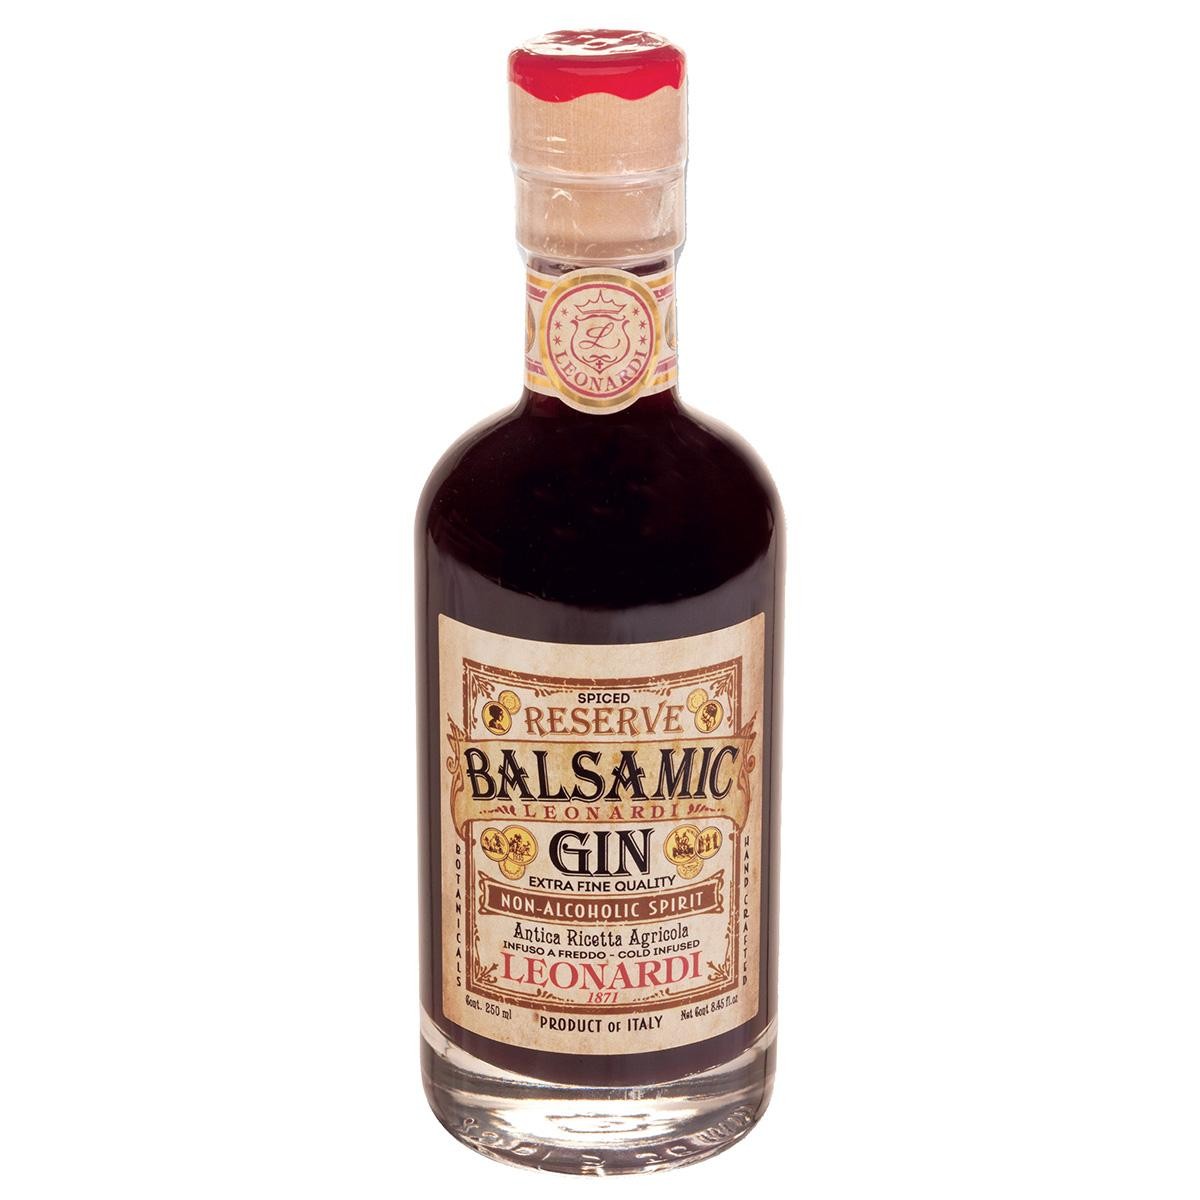 ReseRve Balsamico-Gin